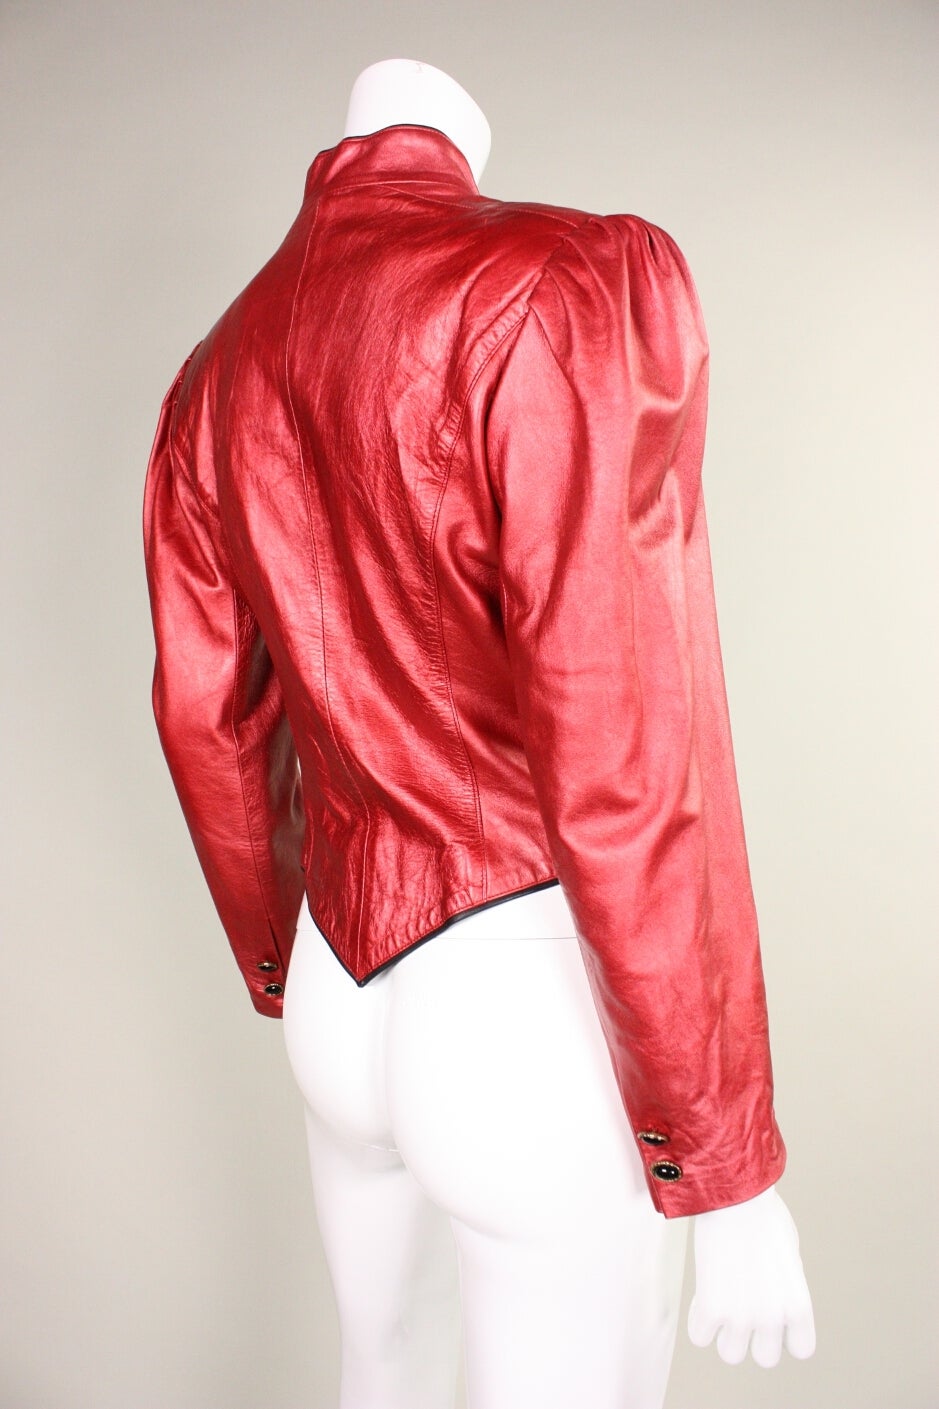 Ungaro Metallic Red Leather Jacket, 1980s  In Excellent Condition For Sale In Los Angeles, CA